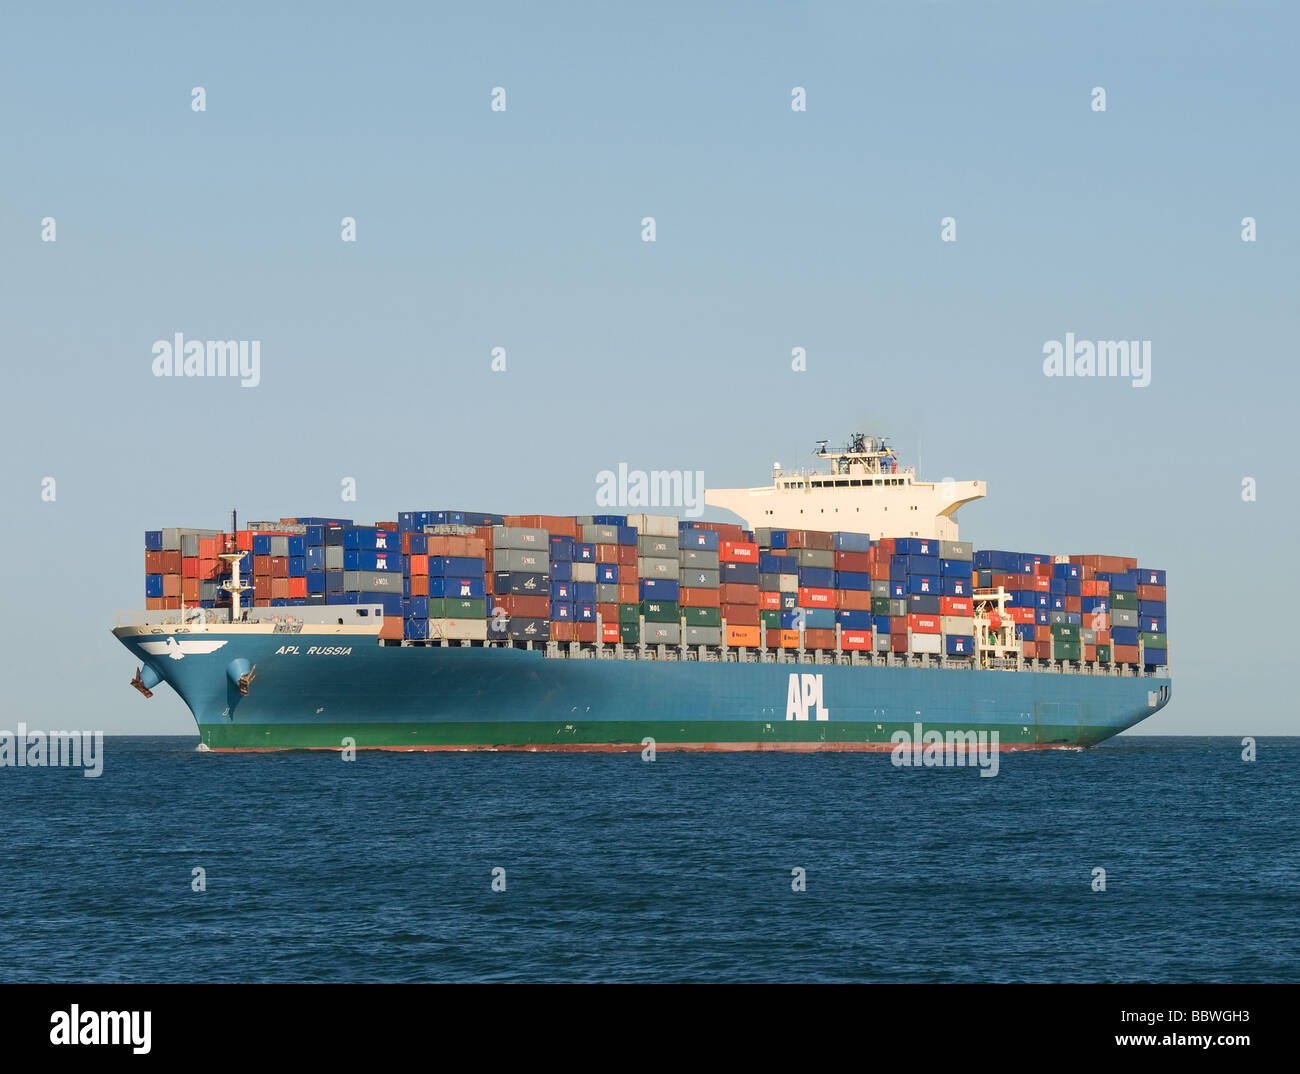 Container ship APL Russia arriving at Southampton UK Stock Photo